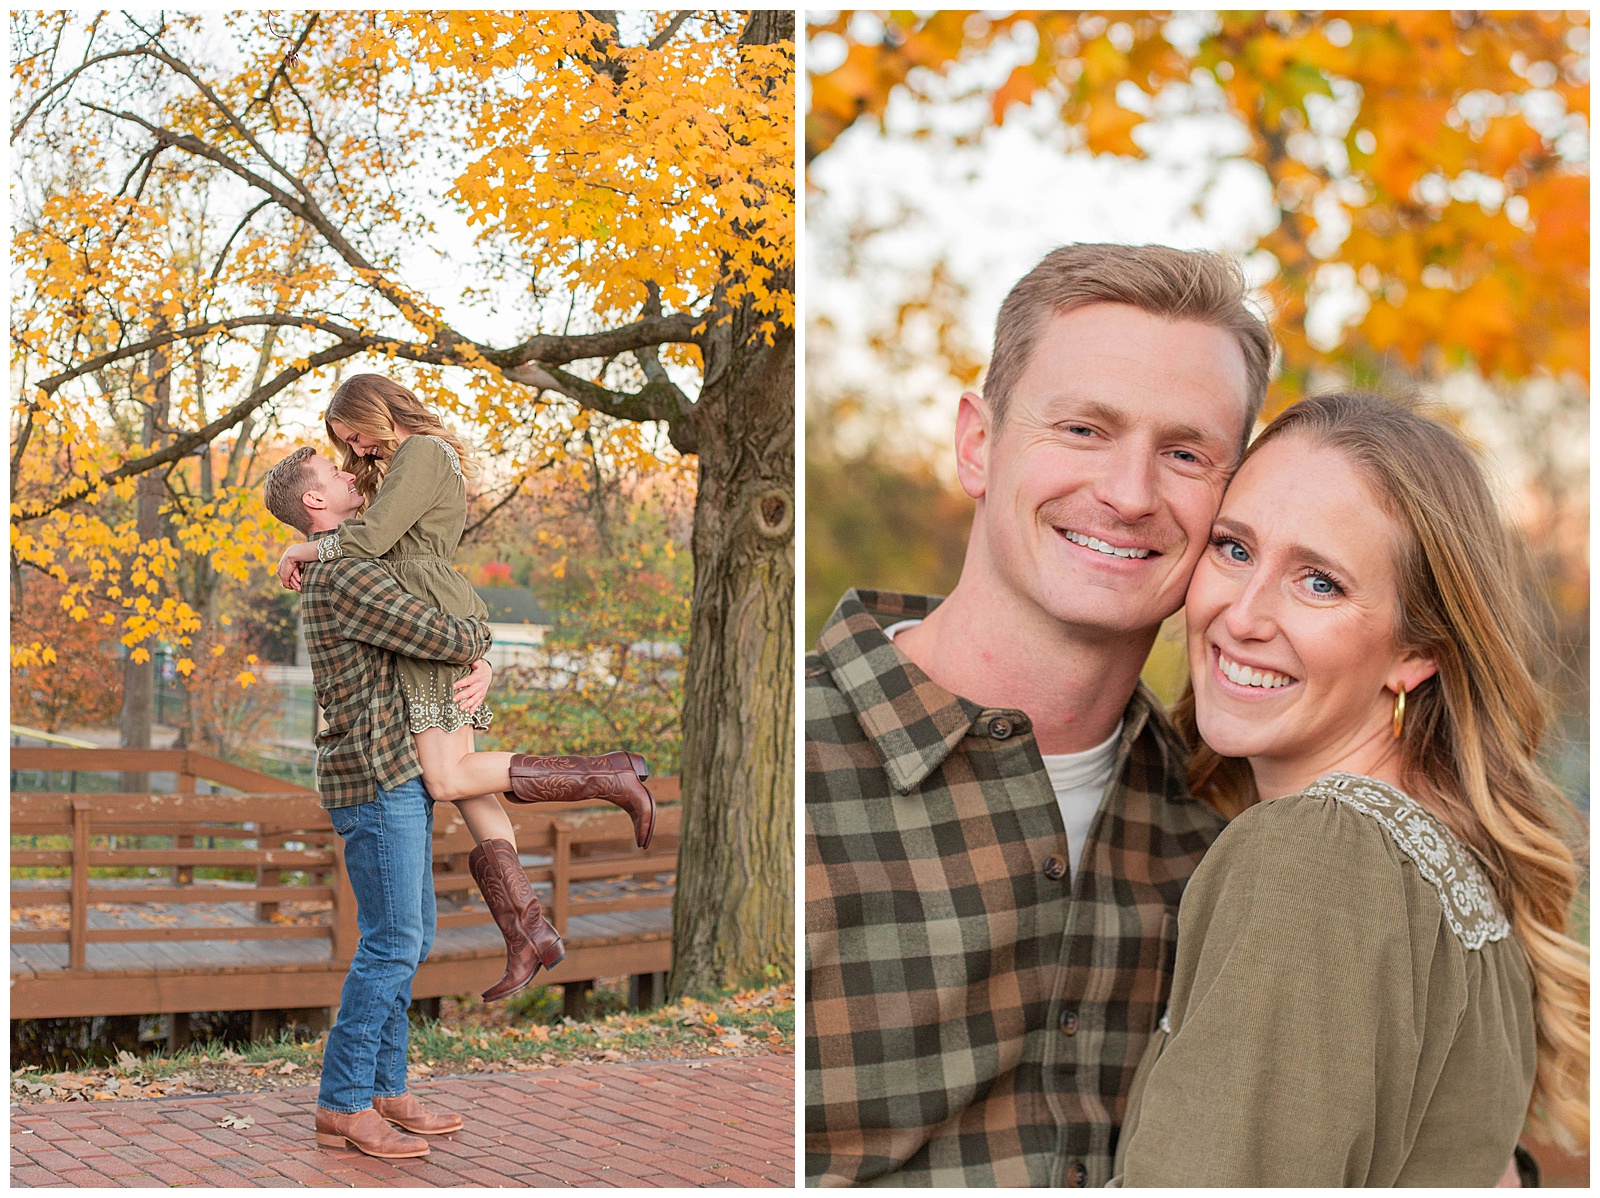 Downtown Zionsville, IN engagement session | Monica Brown Photography